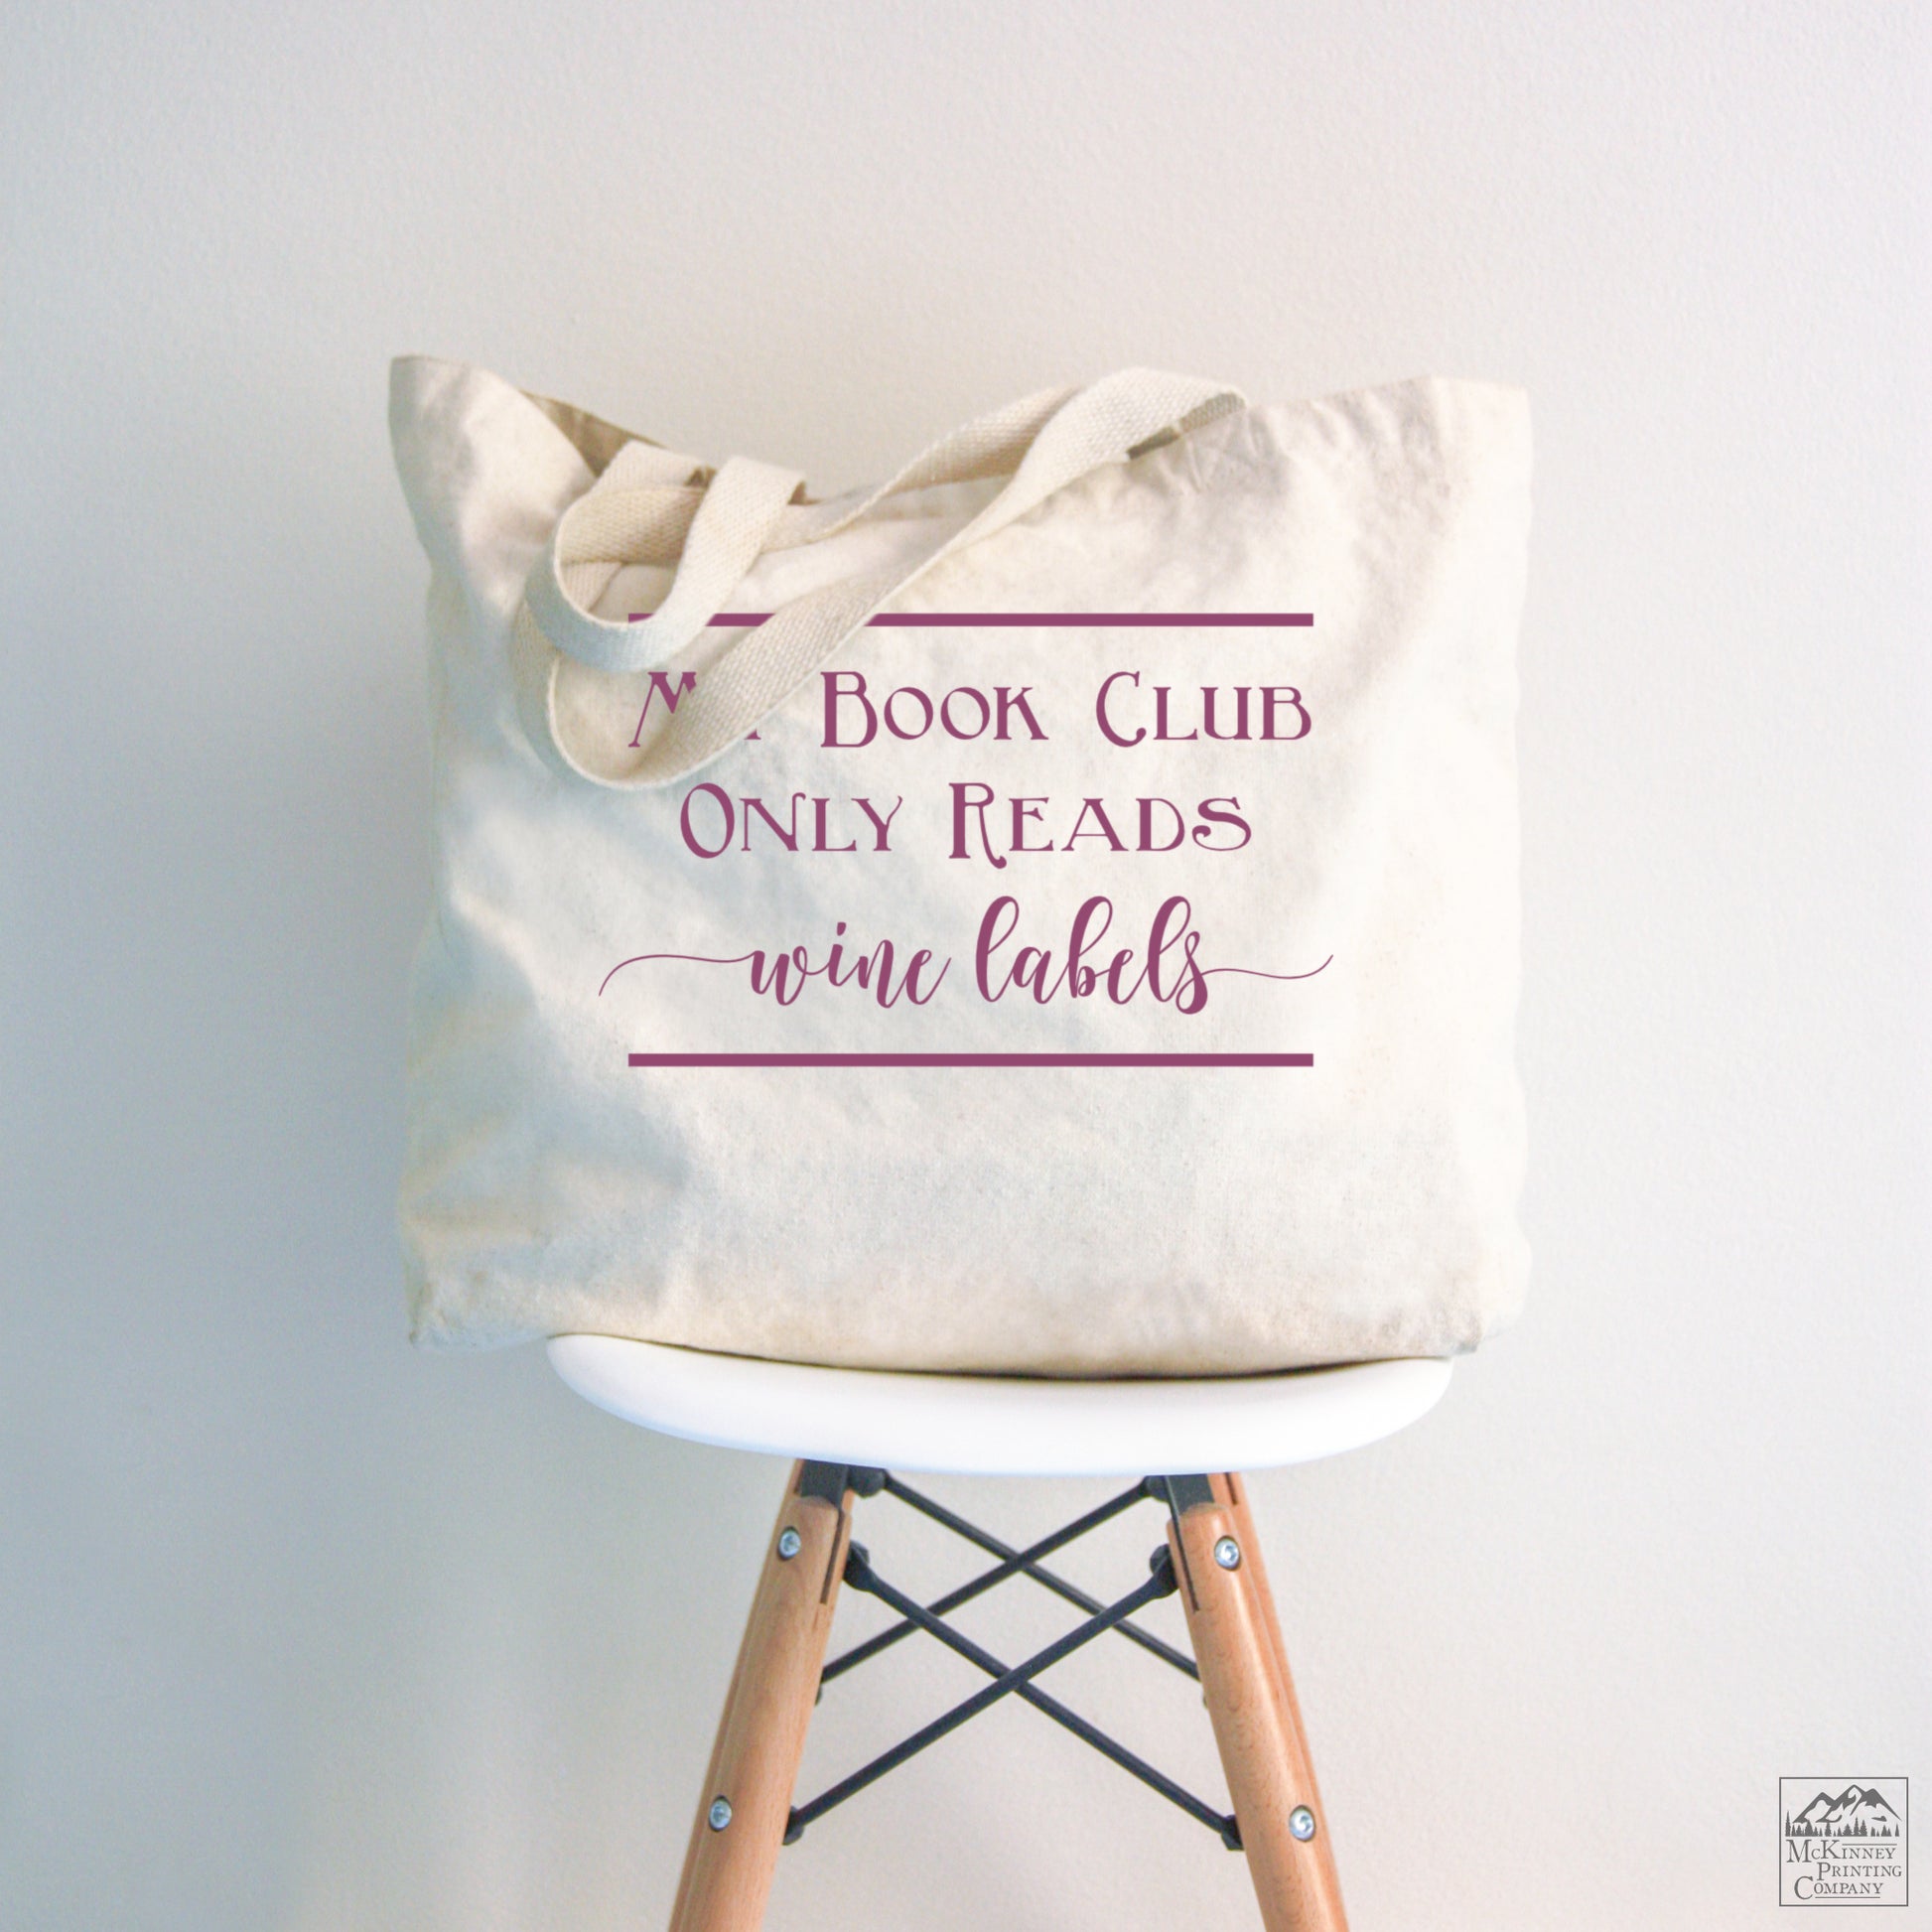 My Book Club Only Reads Wine Labels - Wine Lover Gift, Tote Bag with Zipper, Large, Fabric Shoulder Bag